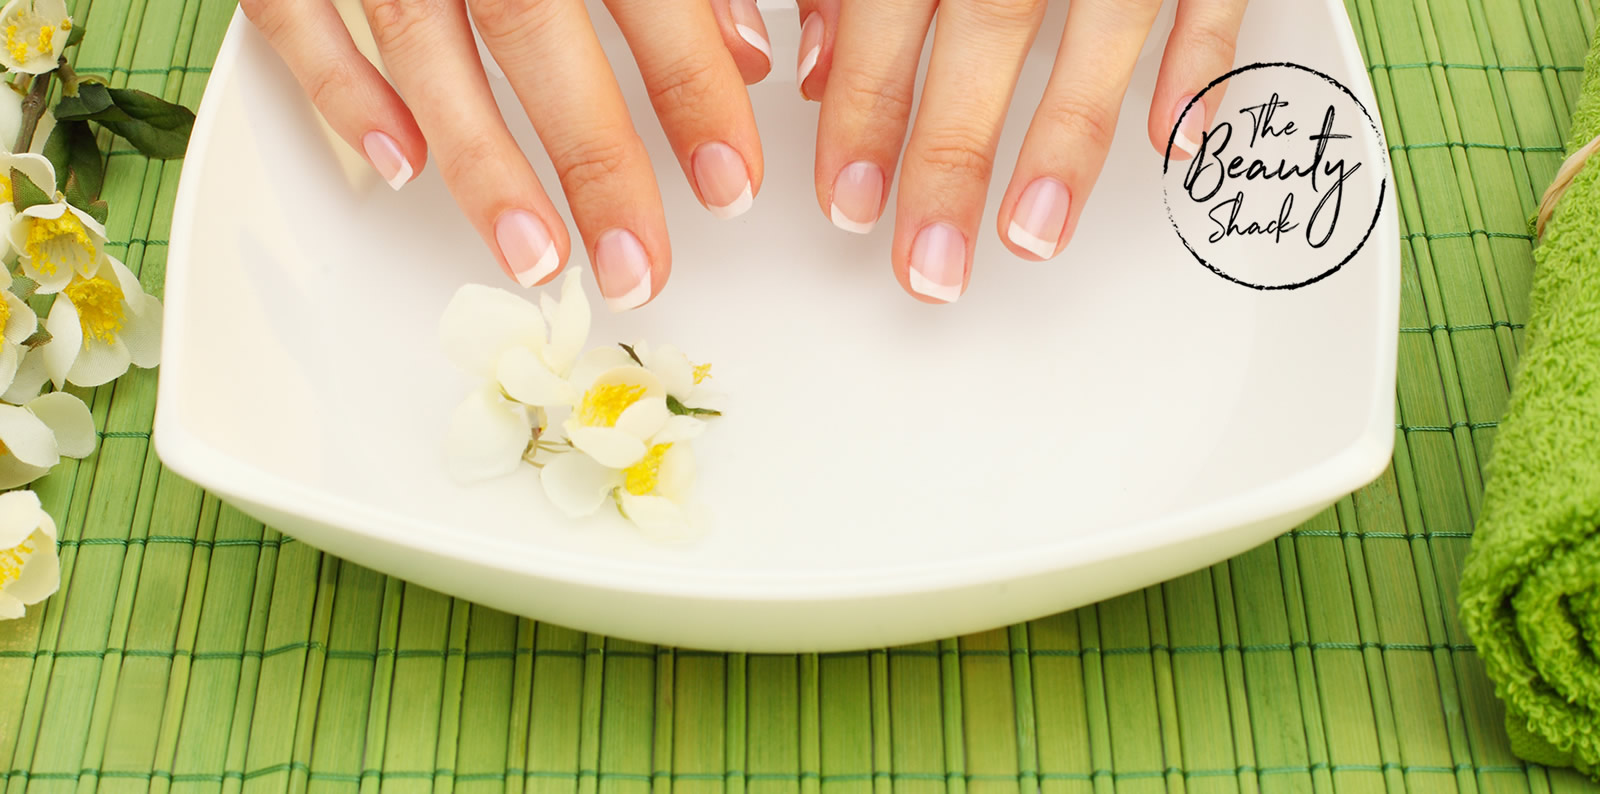 Hands and a bowl of liquid for soaking nails during manicure - The Beauty Shack Salon Logo